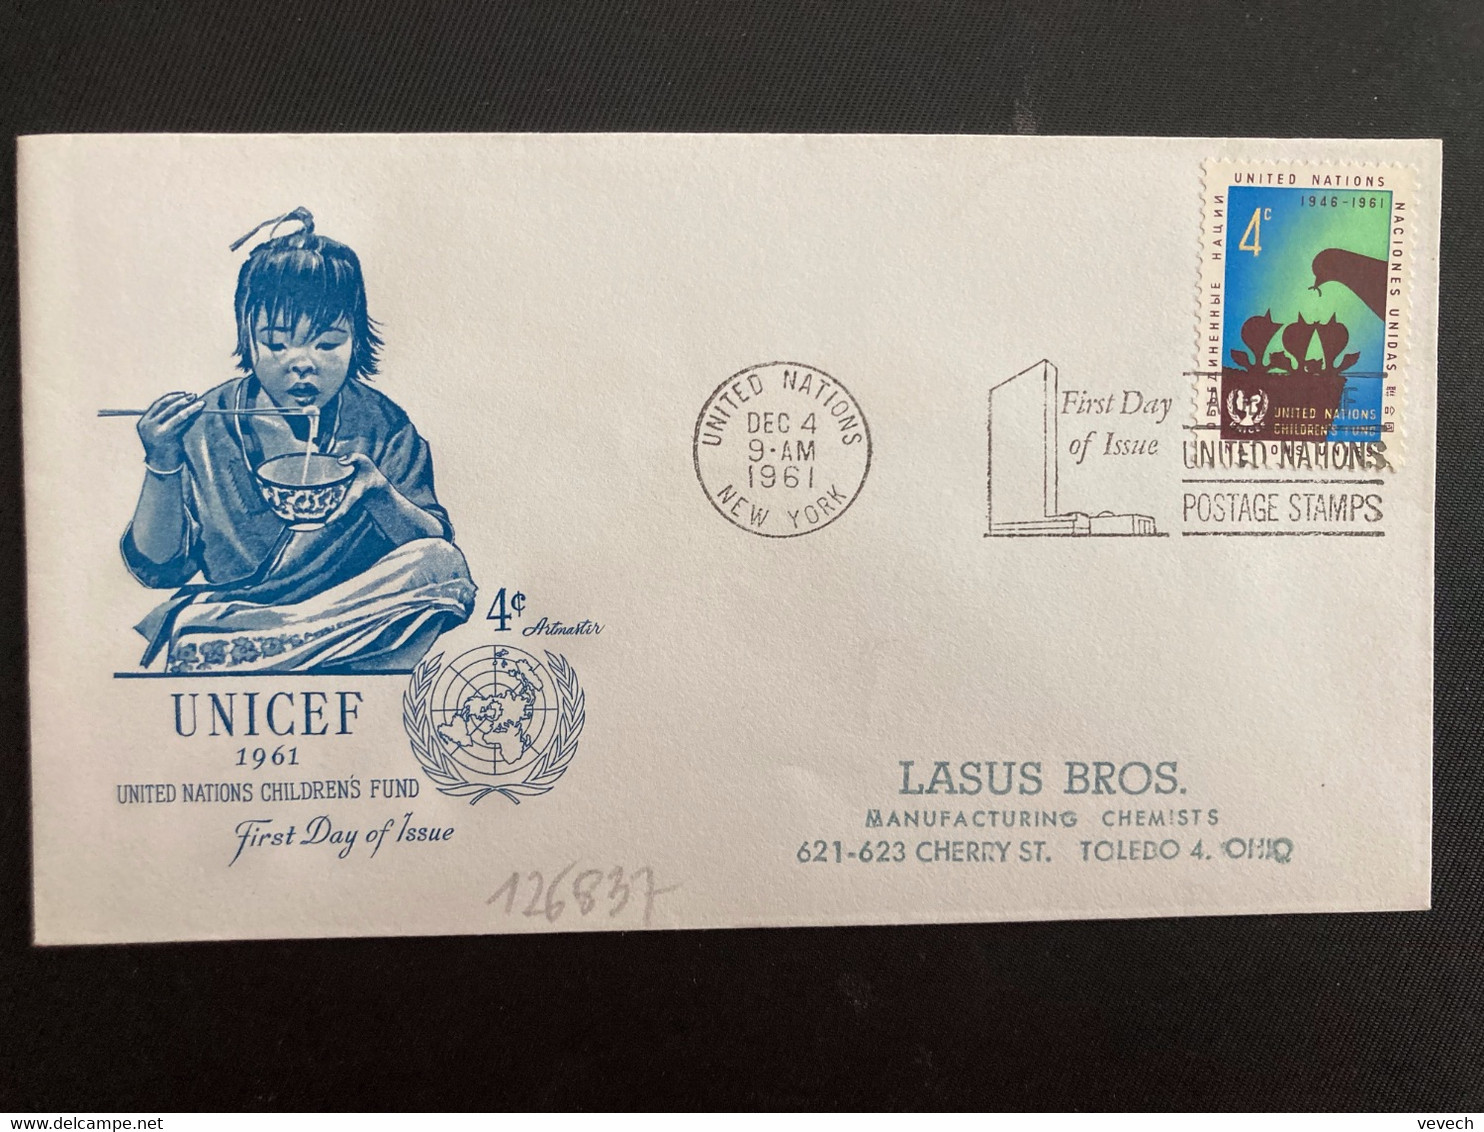 LETTRE TP UNICEF 4c OBL.MEC. DEC 4 1961 UNITED NATIONS NEW YORK - Lettres & Documents